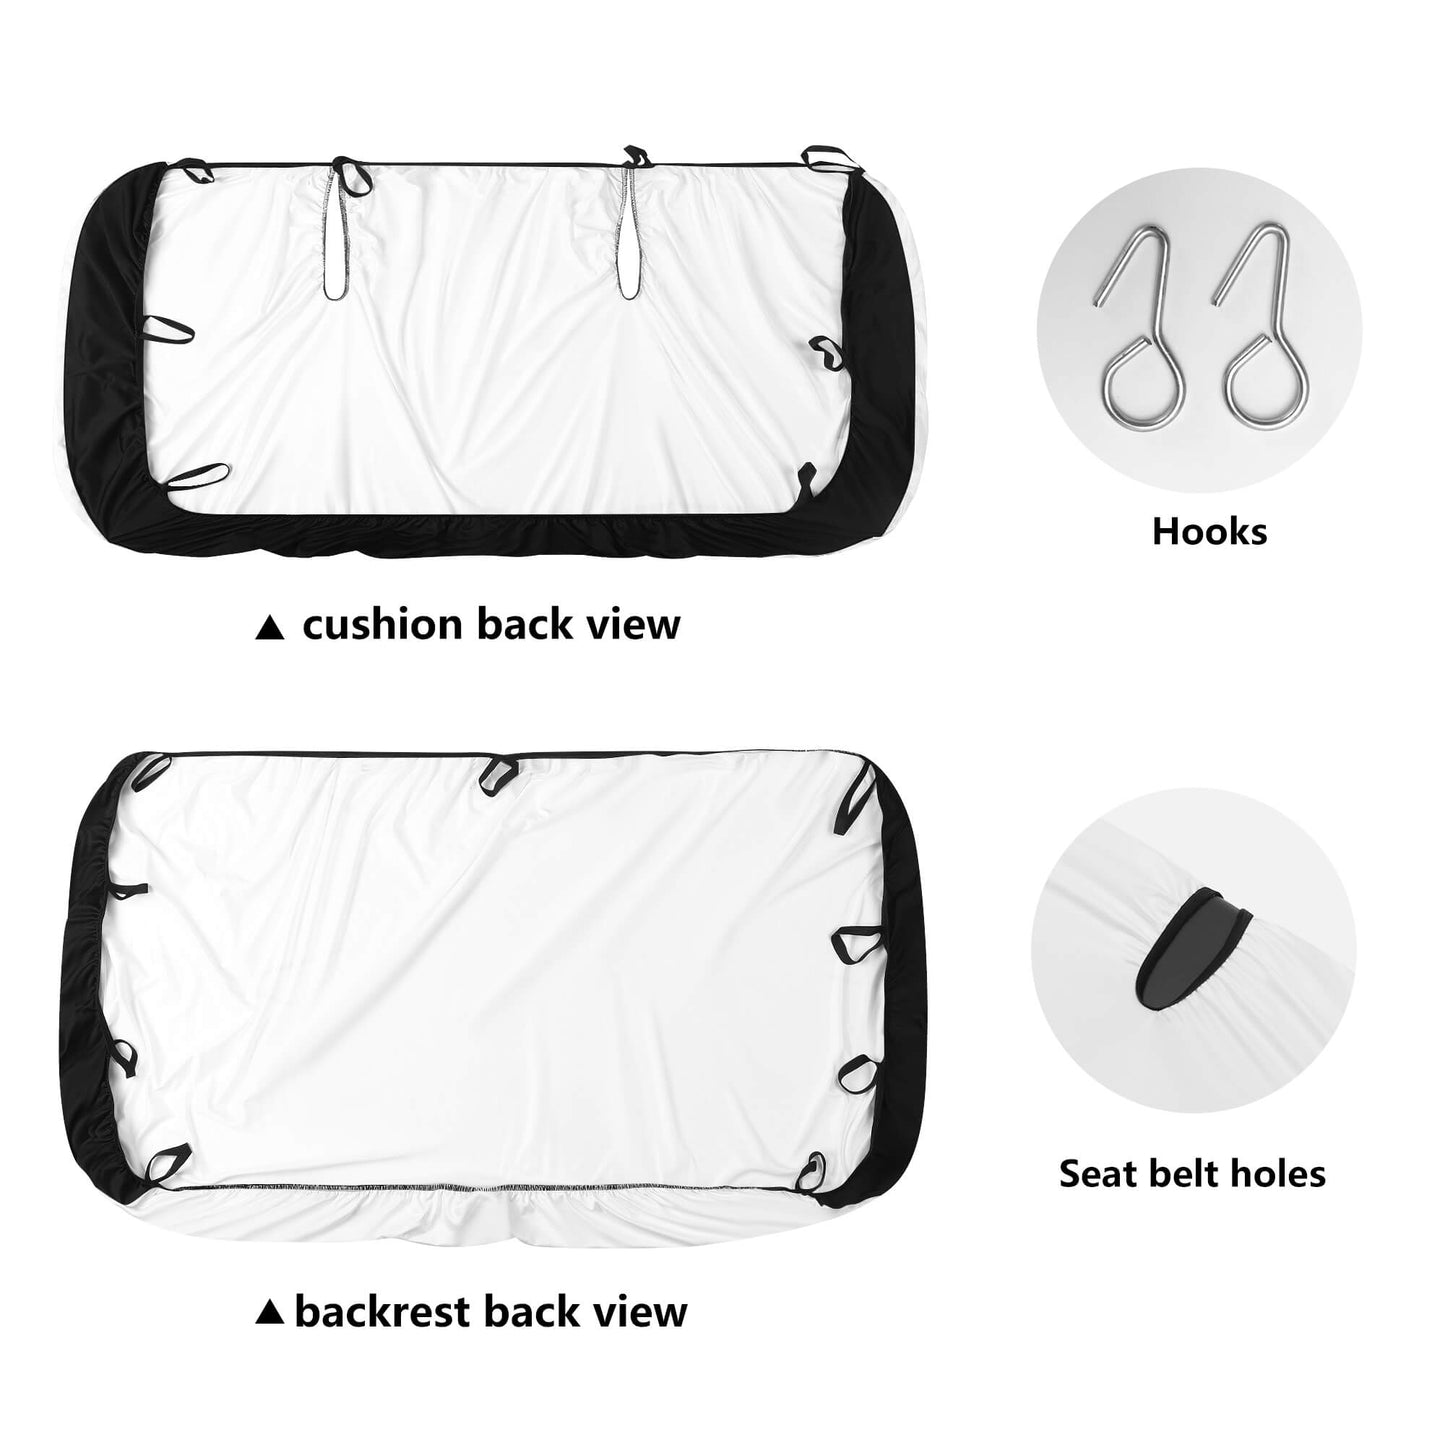 Moon Phase Forest Beetle Car Seat Cover Set